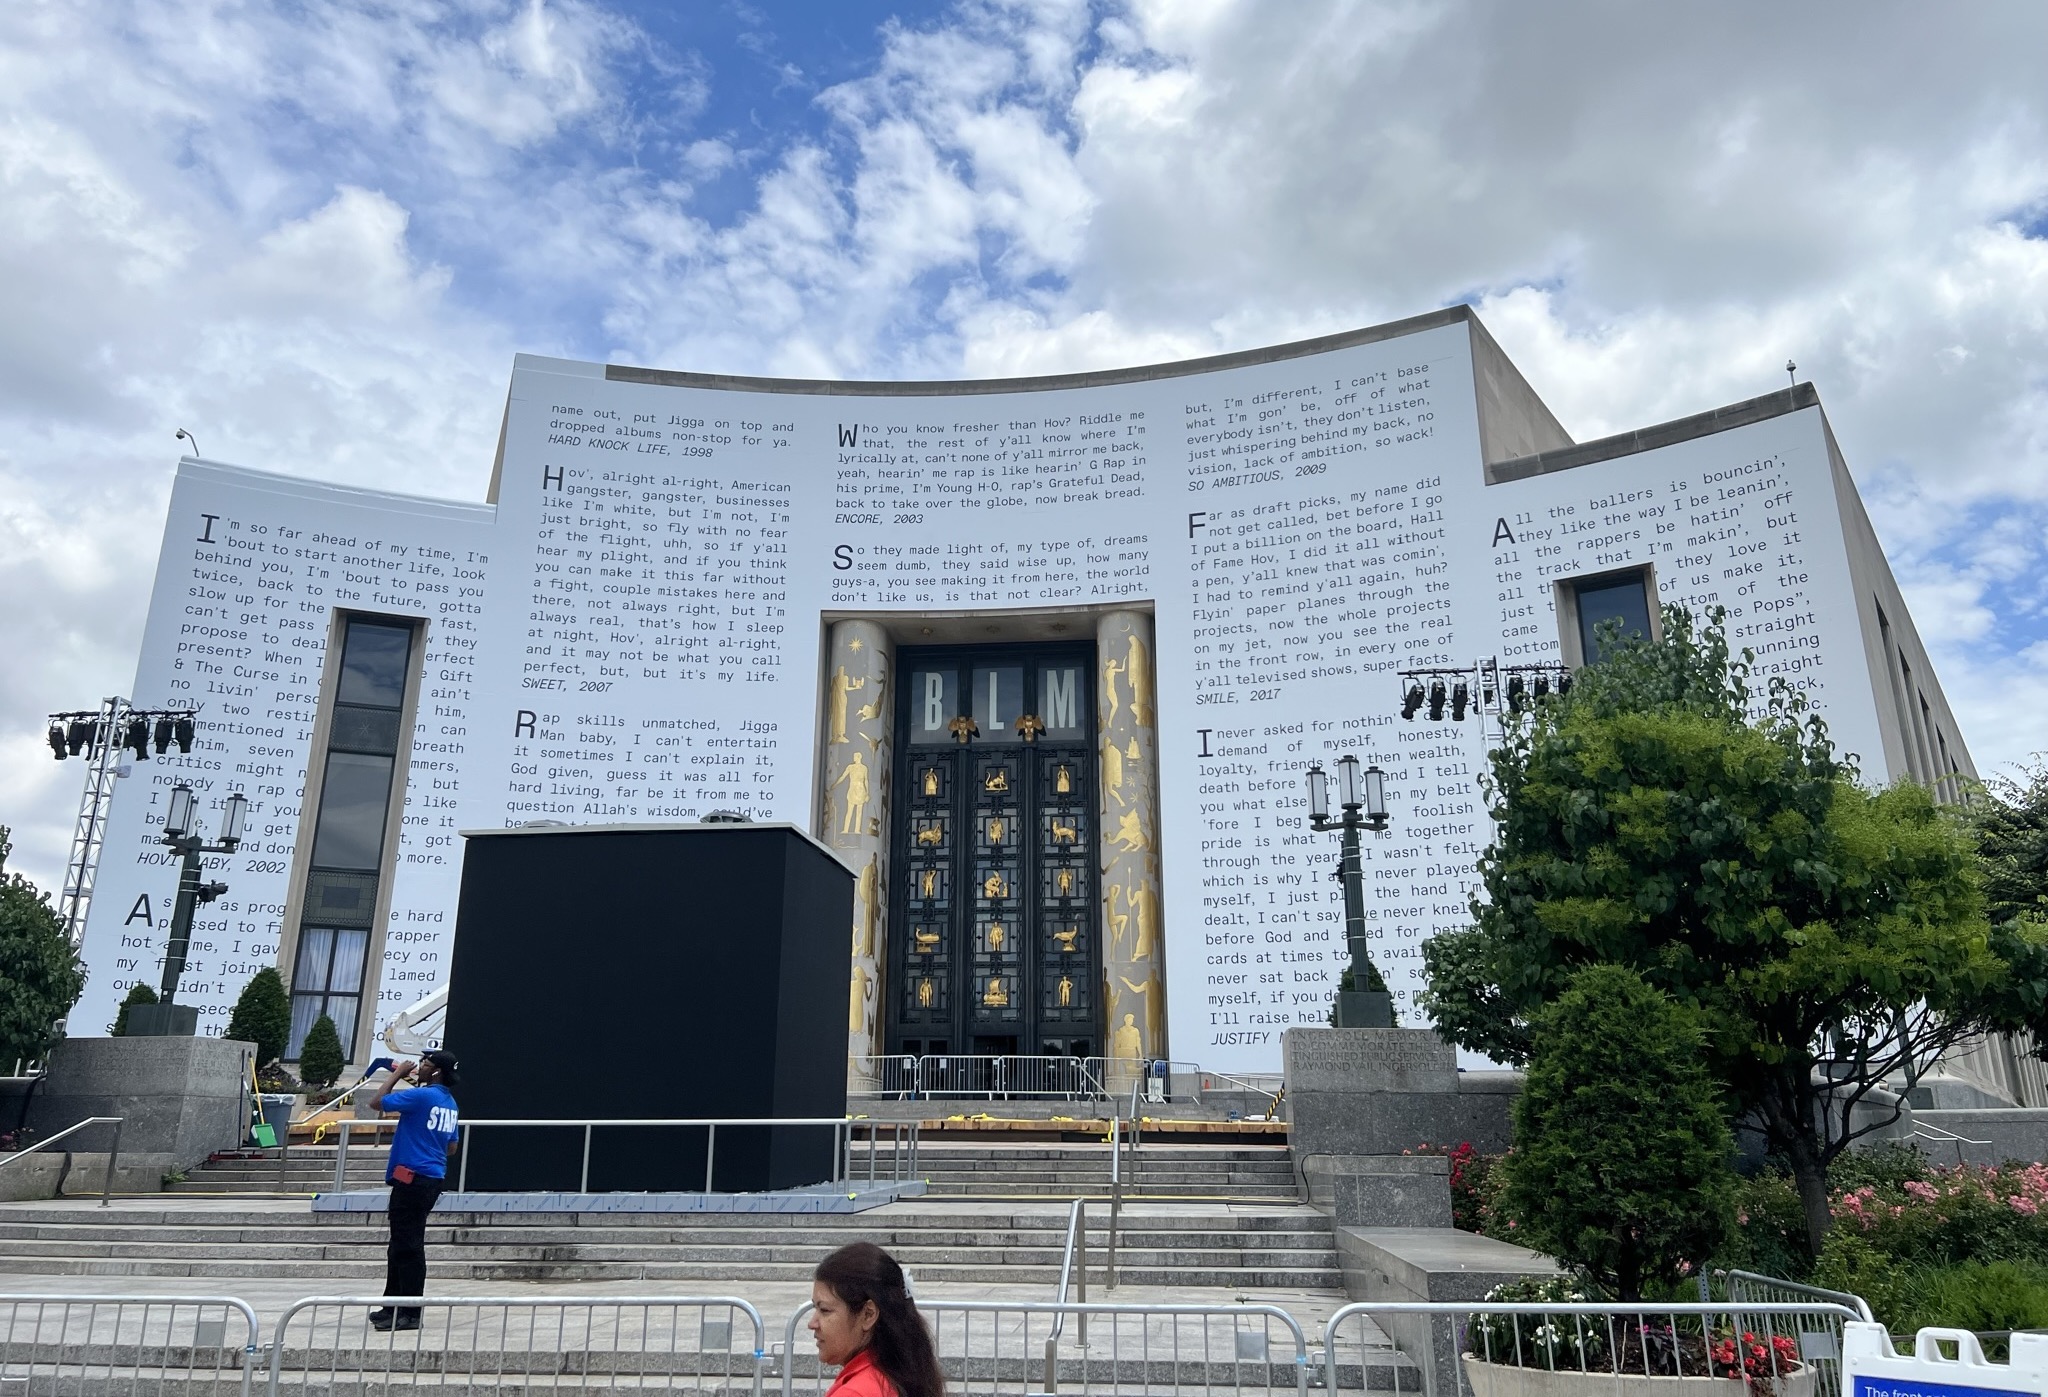 The central branch of Brooklyn Public Library, wrapped in Jay-Z lyrics.